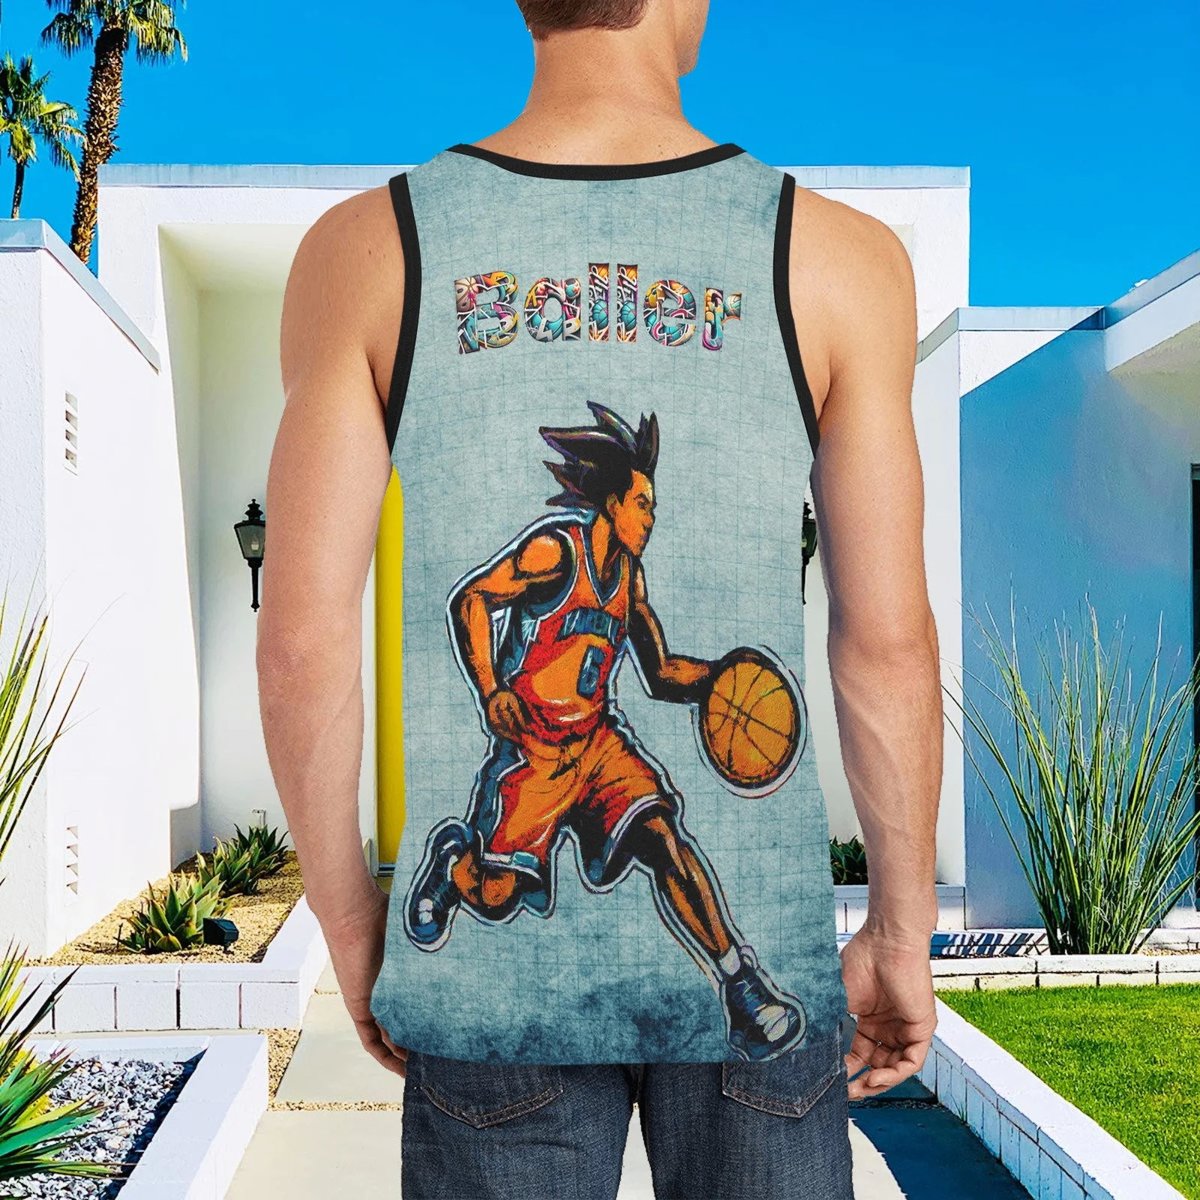 🏀 Get ready to hit the courts in STYLE! 🎨 Introducing our 🔥 NEW basketball and streetball jerseys featuring GRAFFITI ART! 🖌️ Elevate your game with bold designs! SHOP NOW👉bit.ly/buy-eco👈
 #BasketballJerseys #Streetball #GraffitiArt #NewArrivals #basketball #tanktop